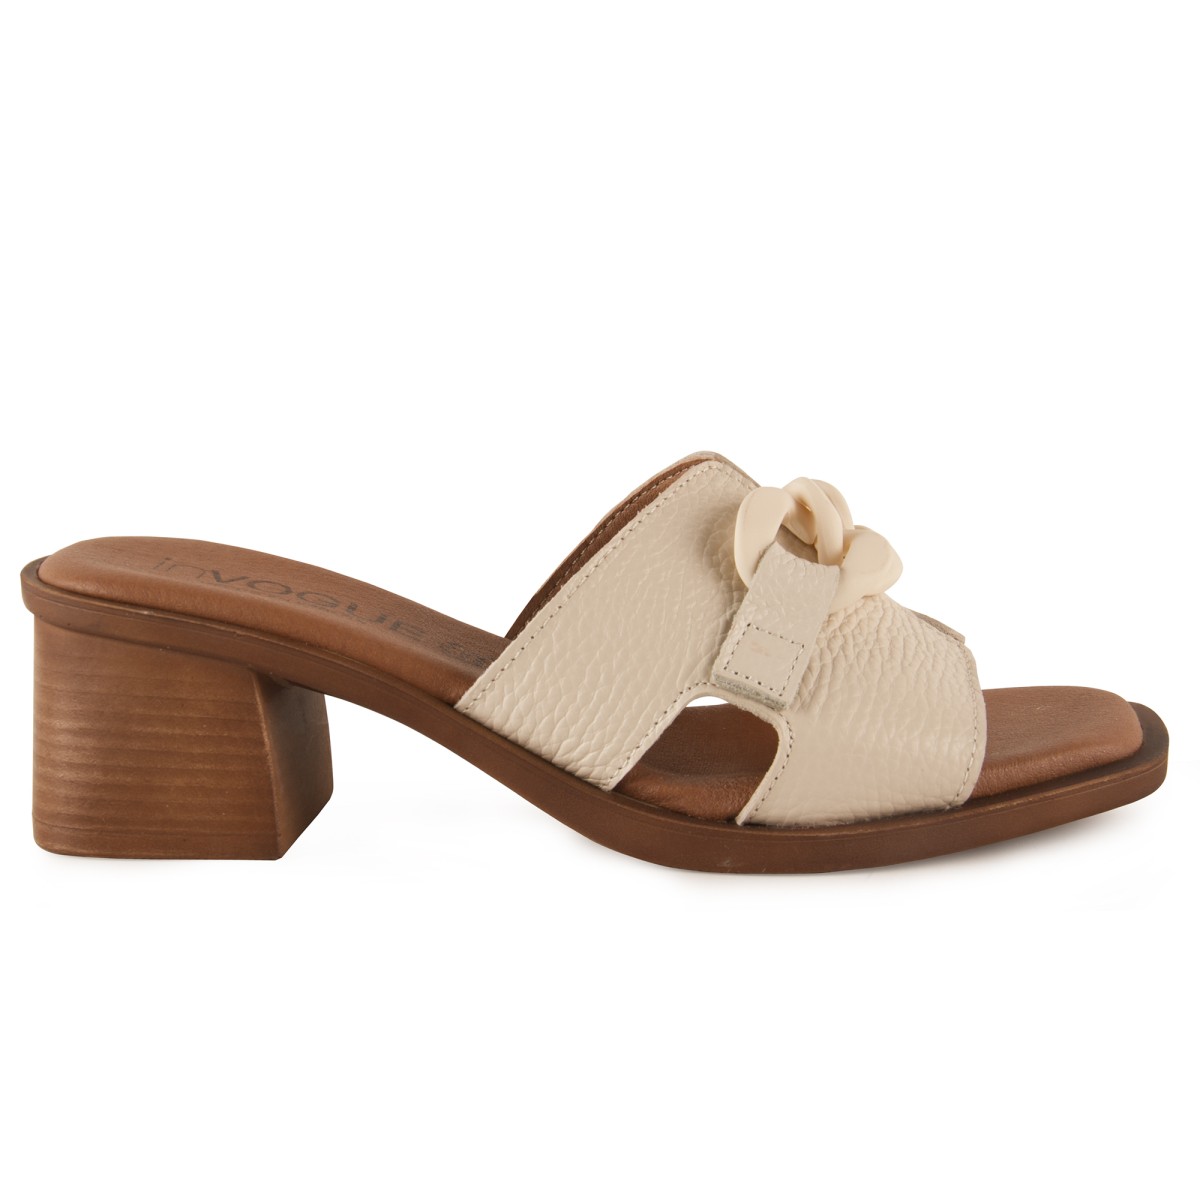 Beige leather sandals by Chamby